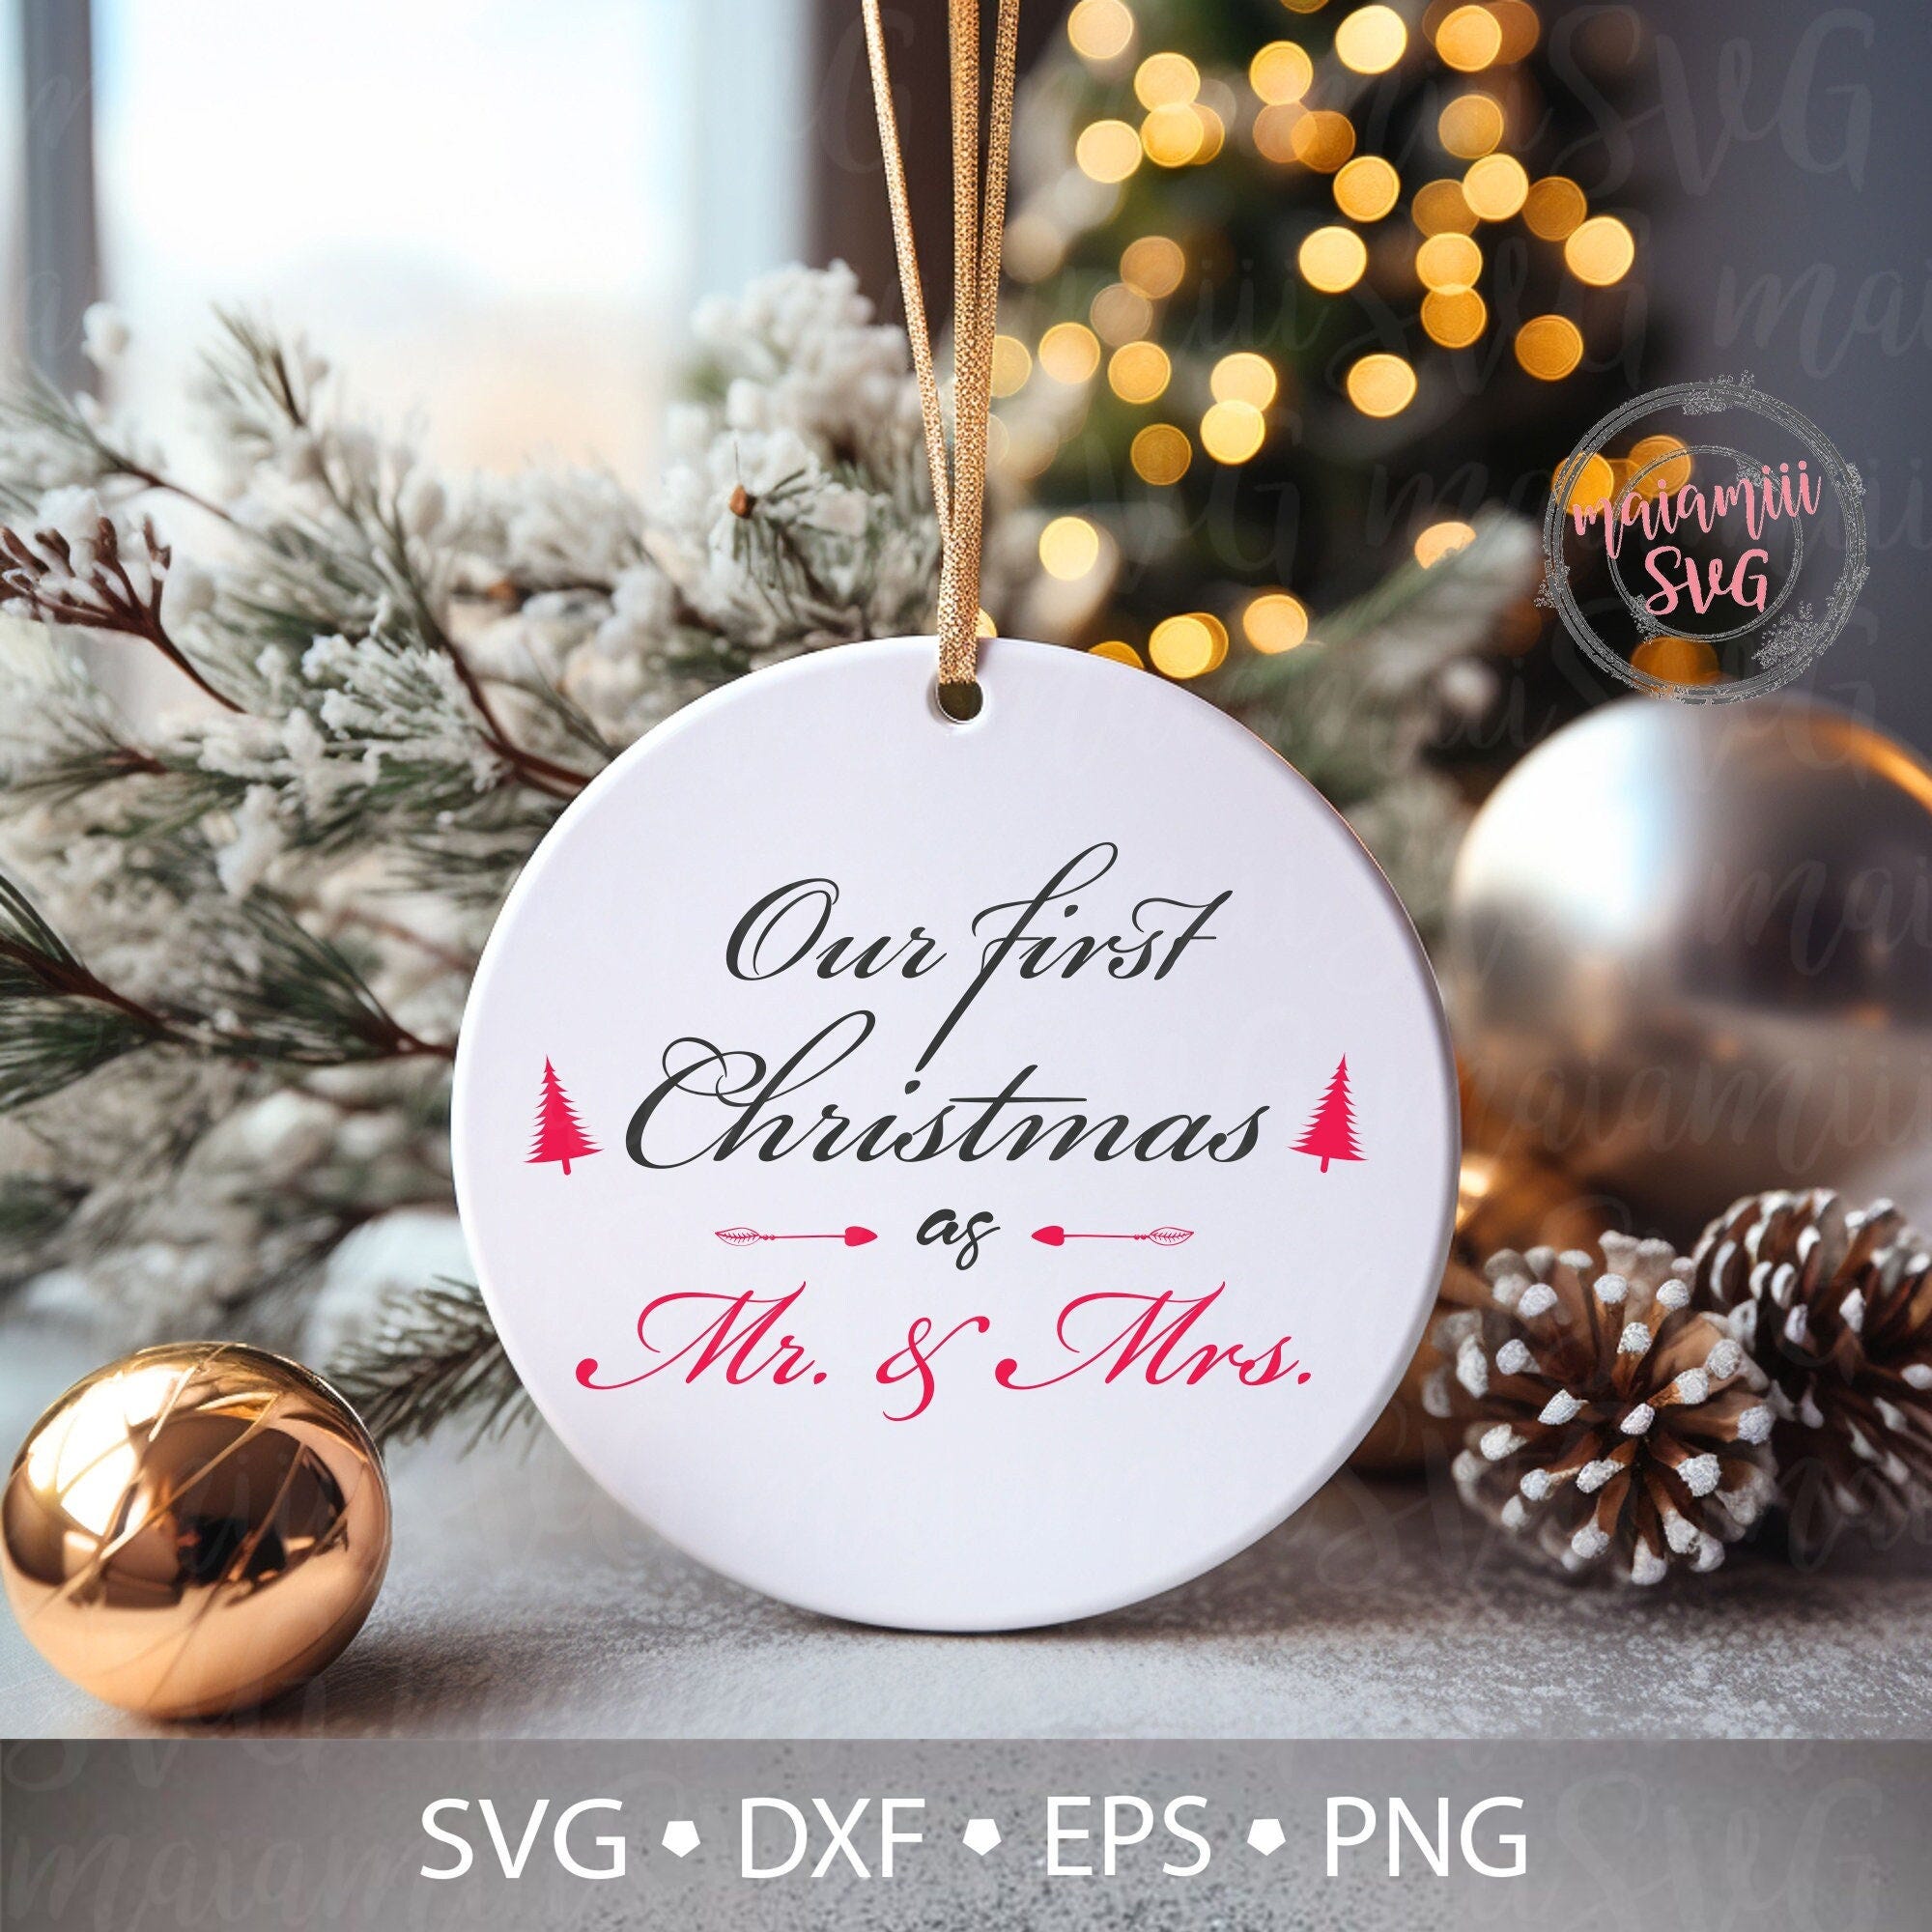 Our First Christmas as Mr & Mrs Svg, Christmas Couple Svg, First Christmas Decoration, Mr and Mrs Ornaments, Christmas Frame Svg